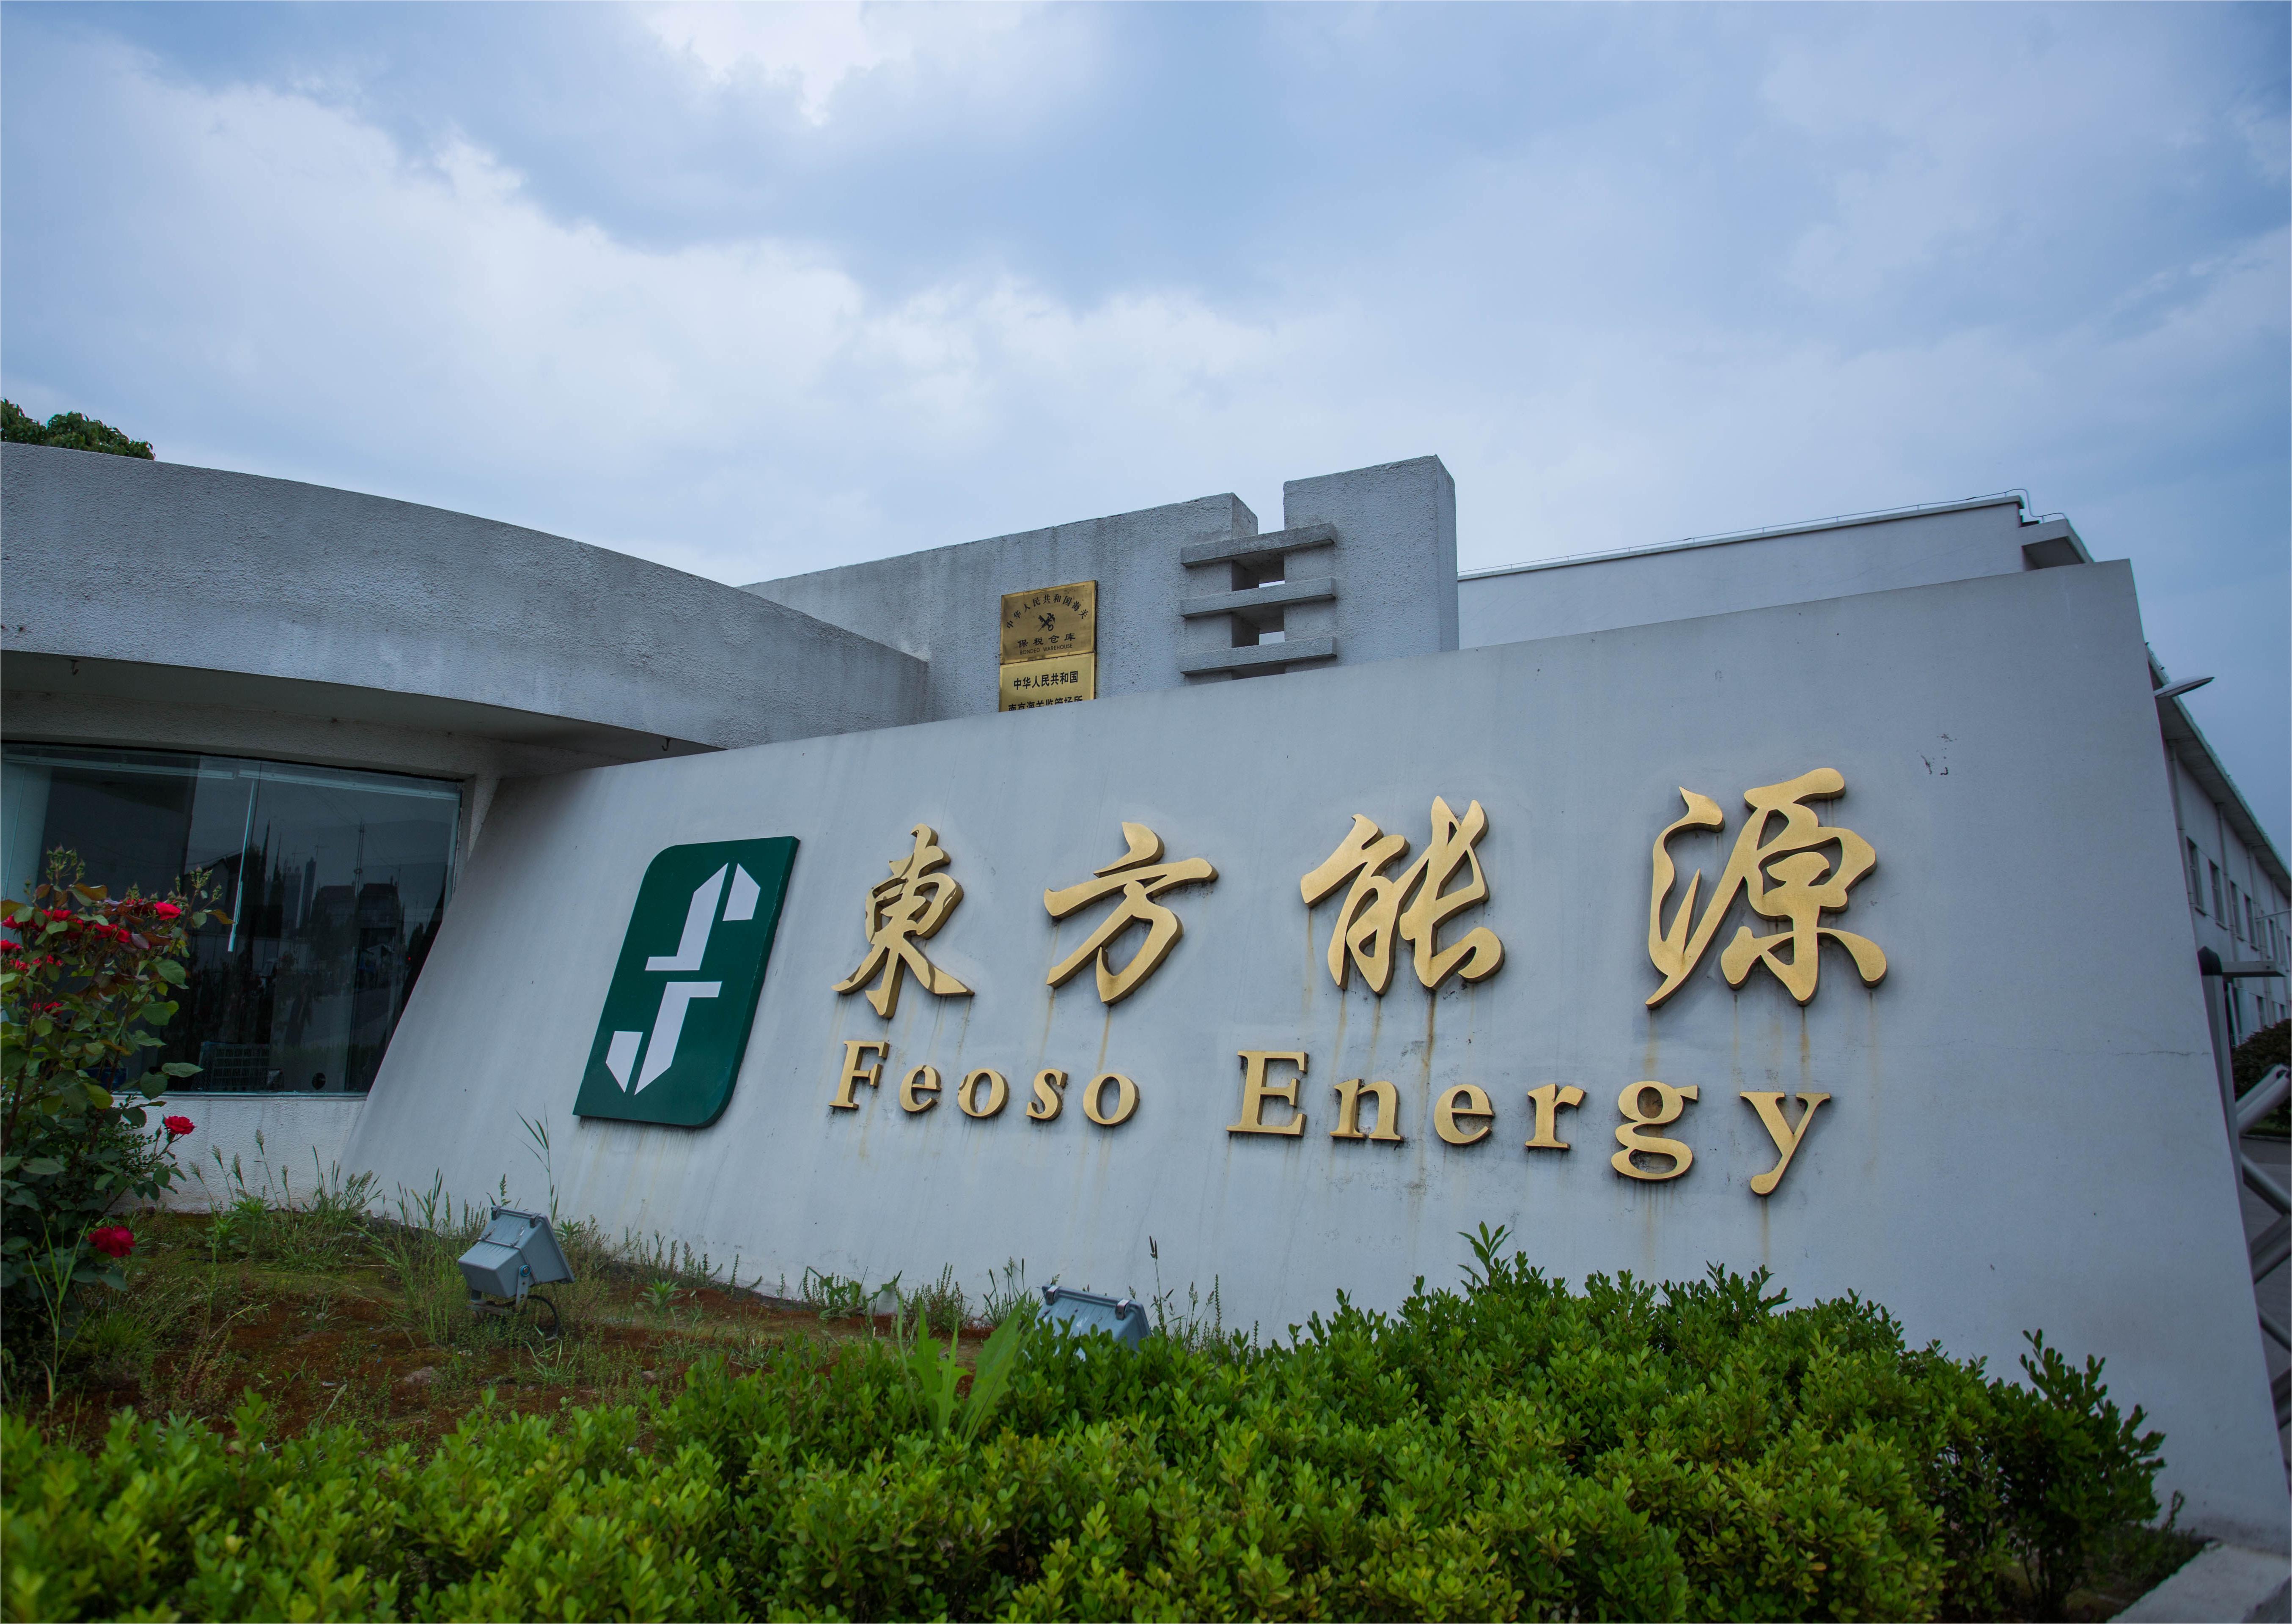 Shanghai Jingyi New Material Technology Co.,Ltd came to Jiangsu Dongfang Energy Co., Ltd. with an auditor to participate in the NSF on-site guidance and factory audit for food grade lubricants.